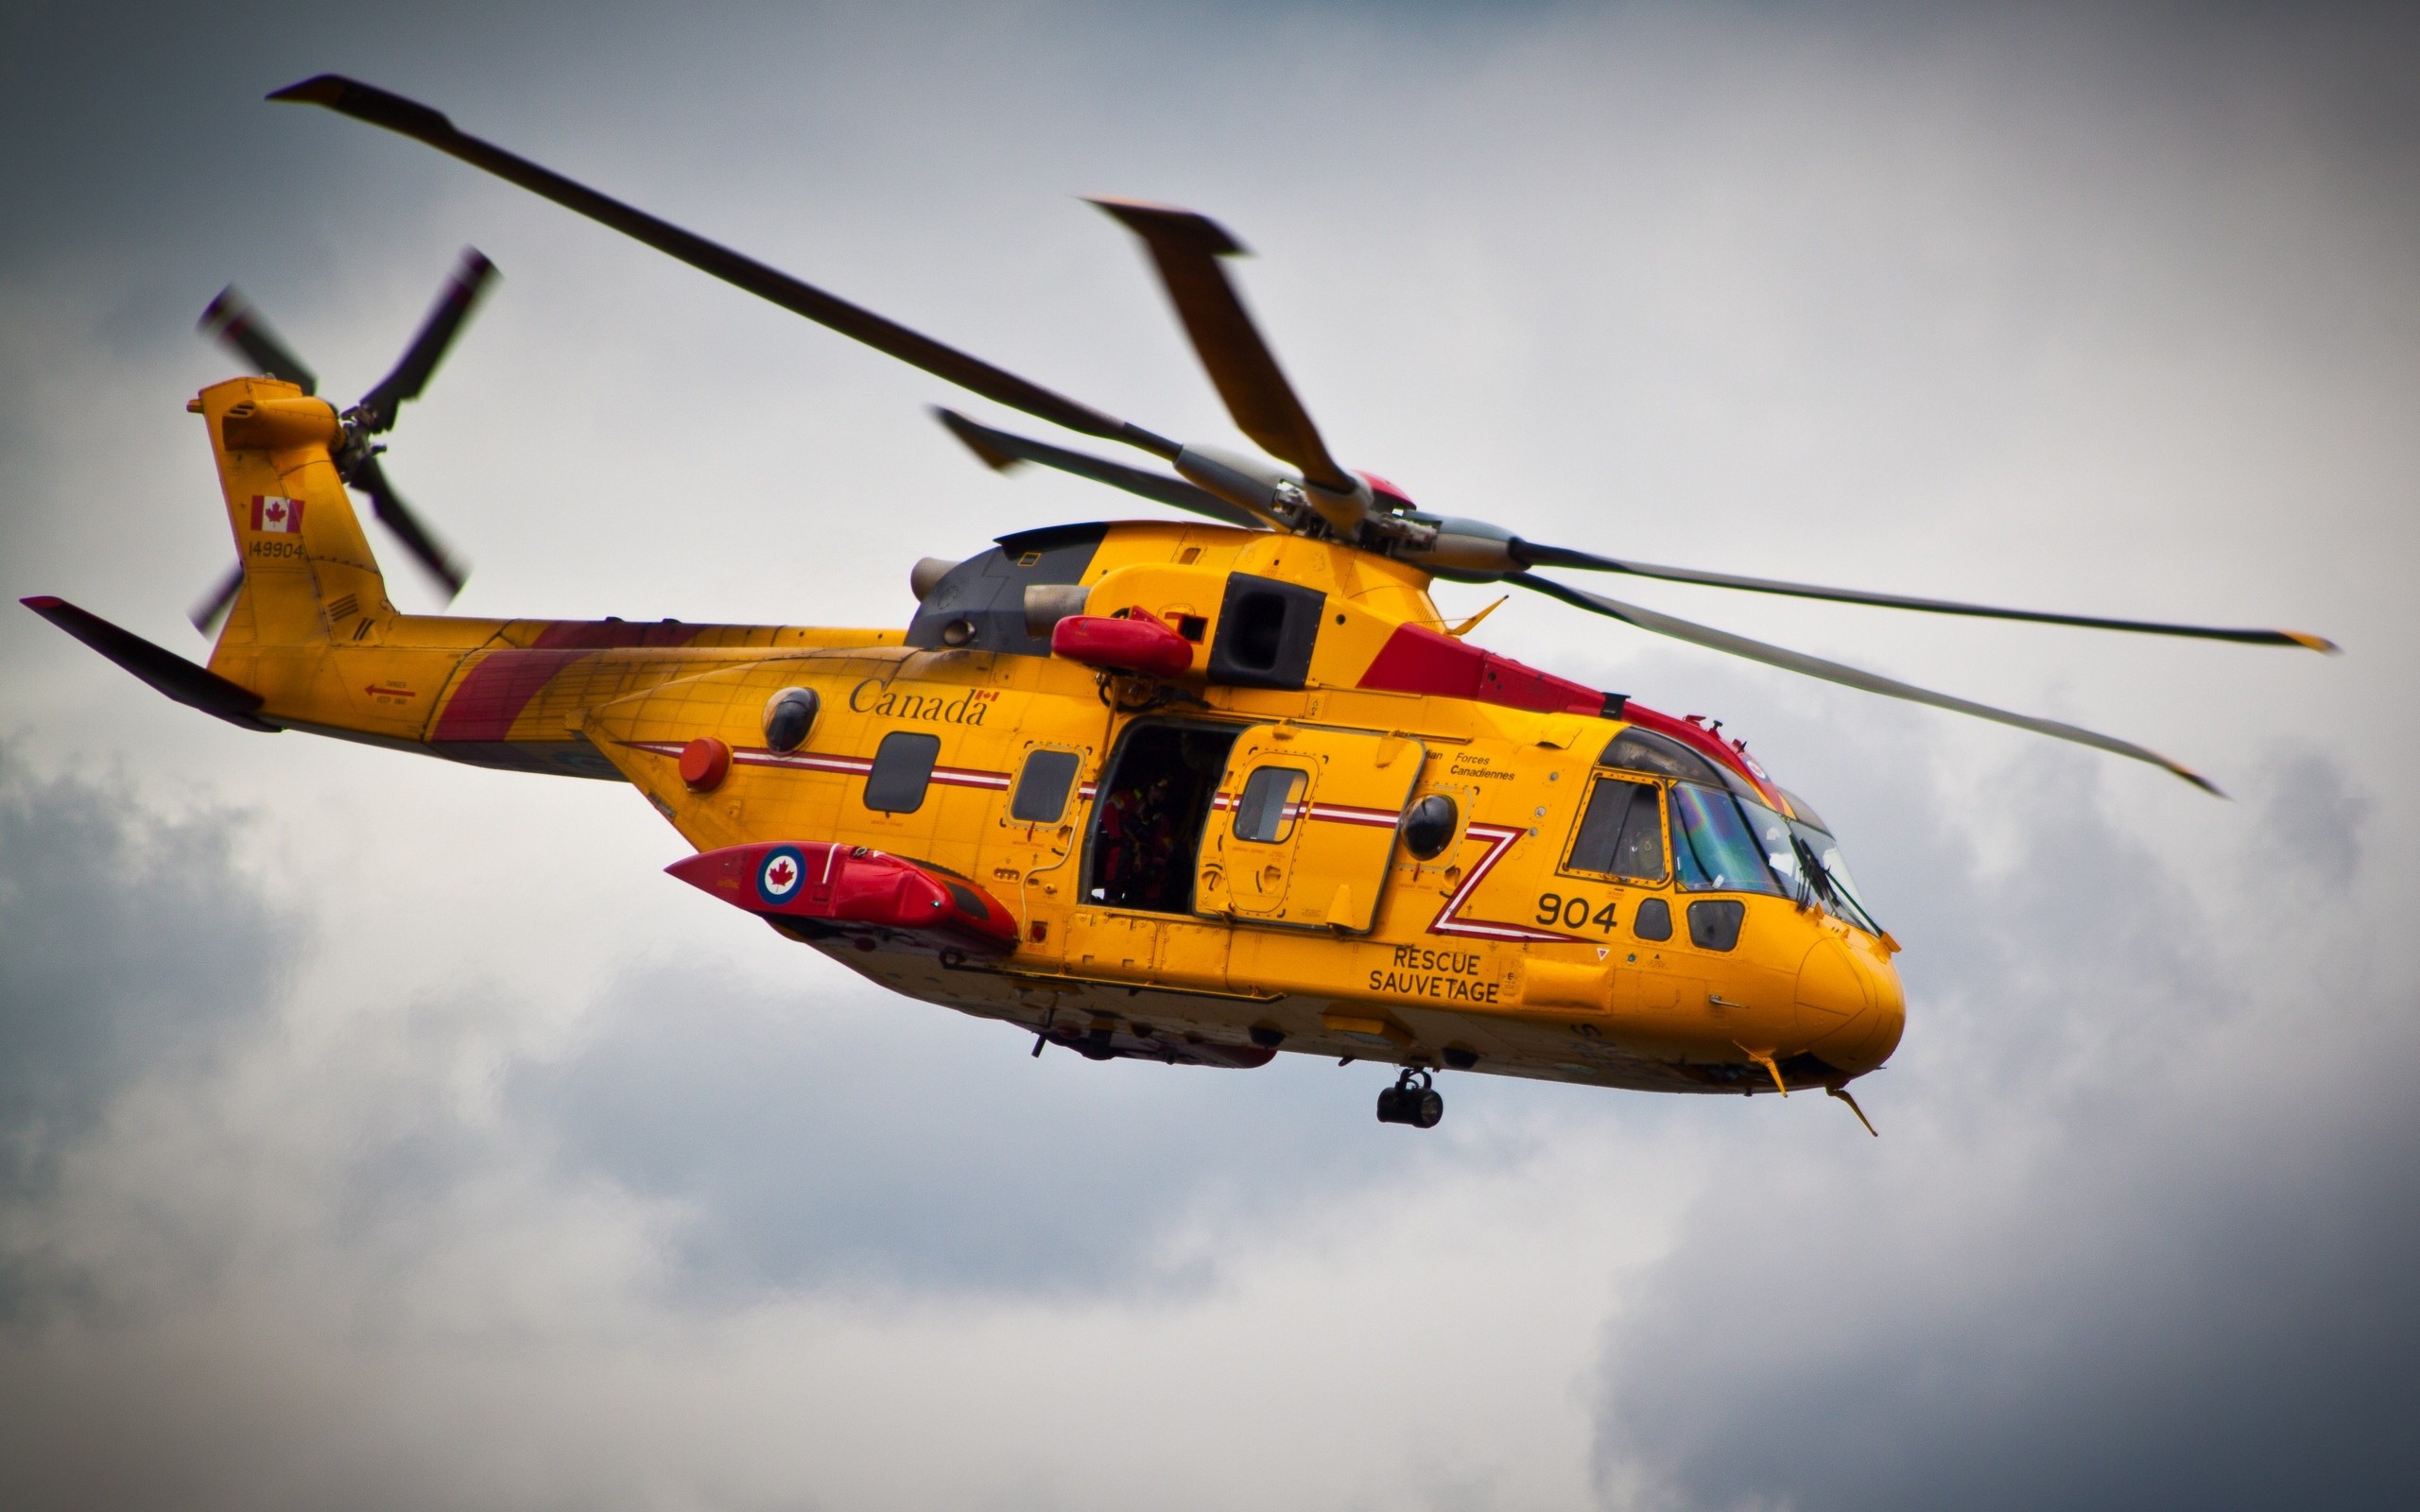 General 2560x1600 helicopters vehicle Canada orange overcast numbers